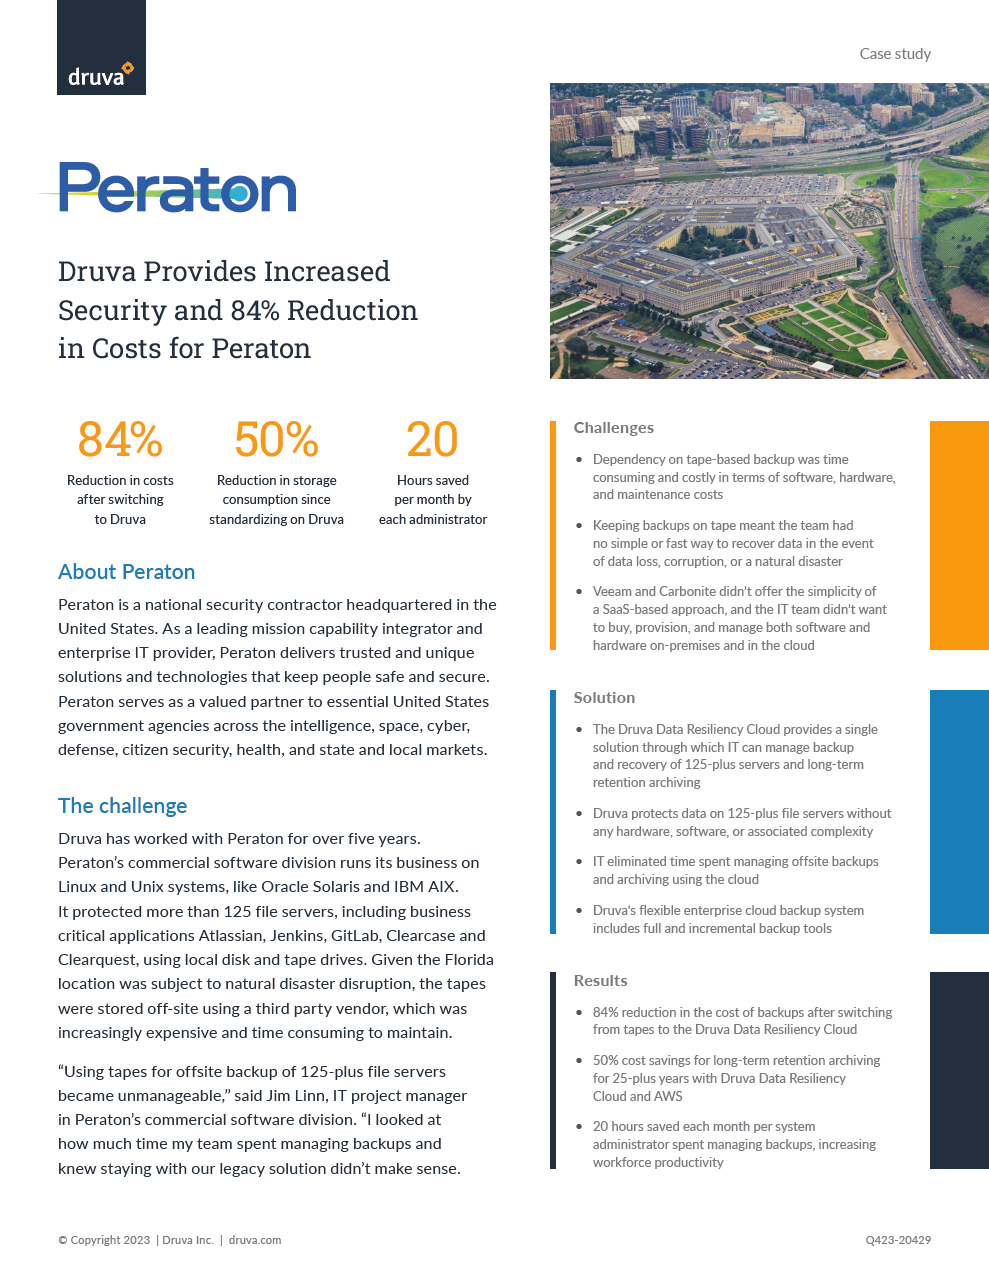 Druva Provides Increased Security and 84% Reduction in Costs for Peraton